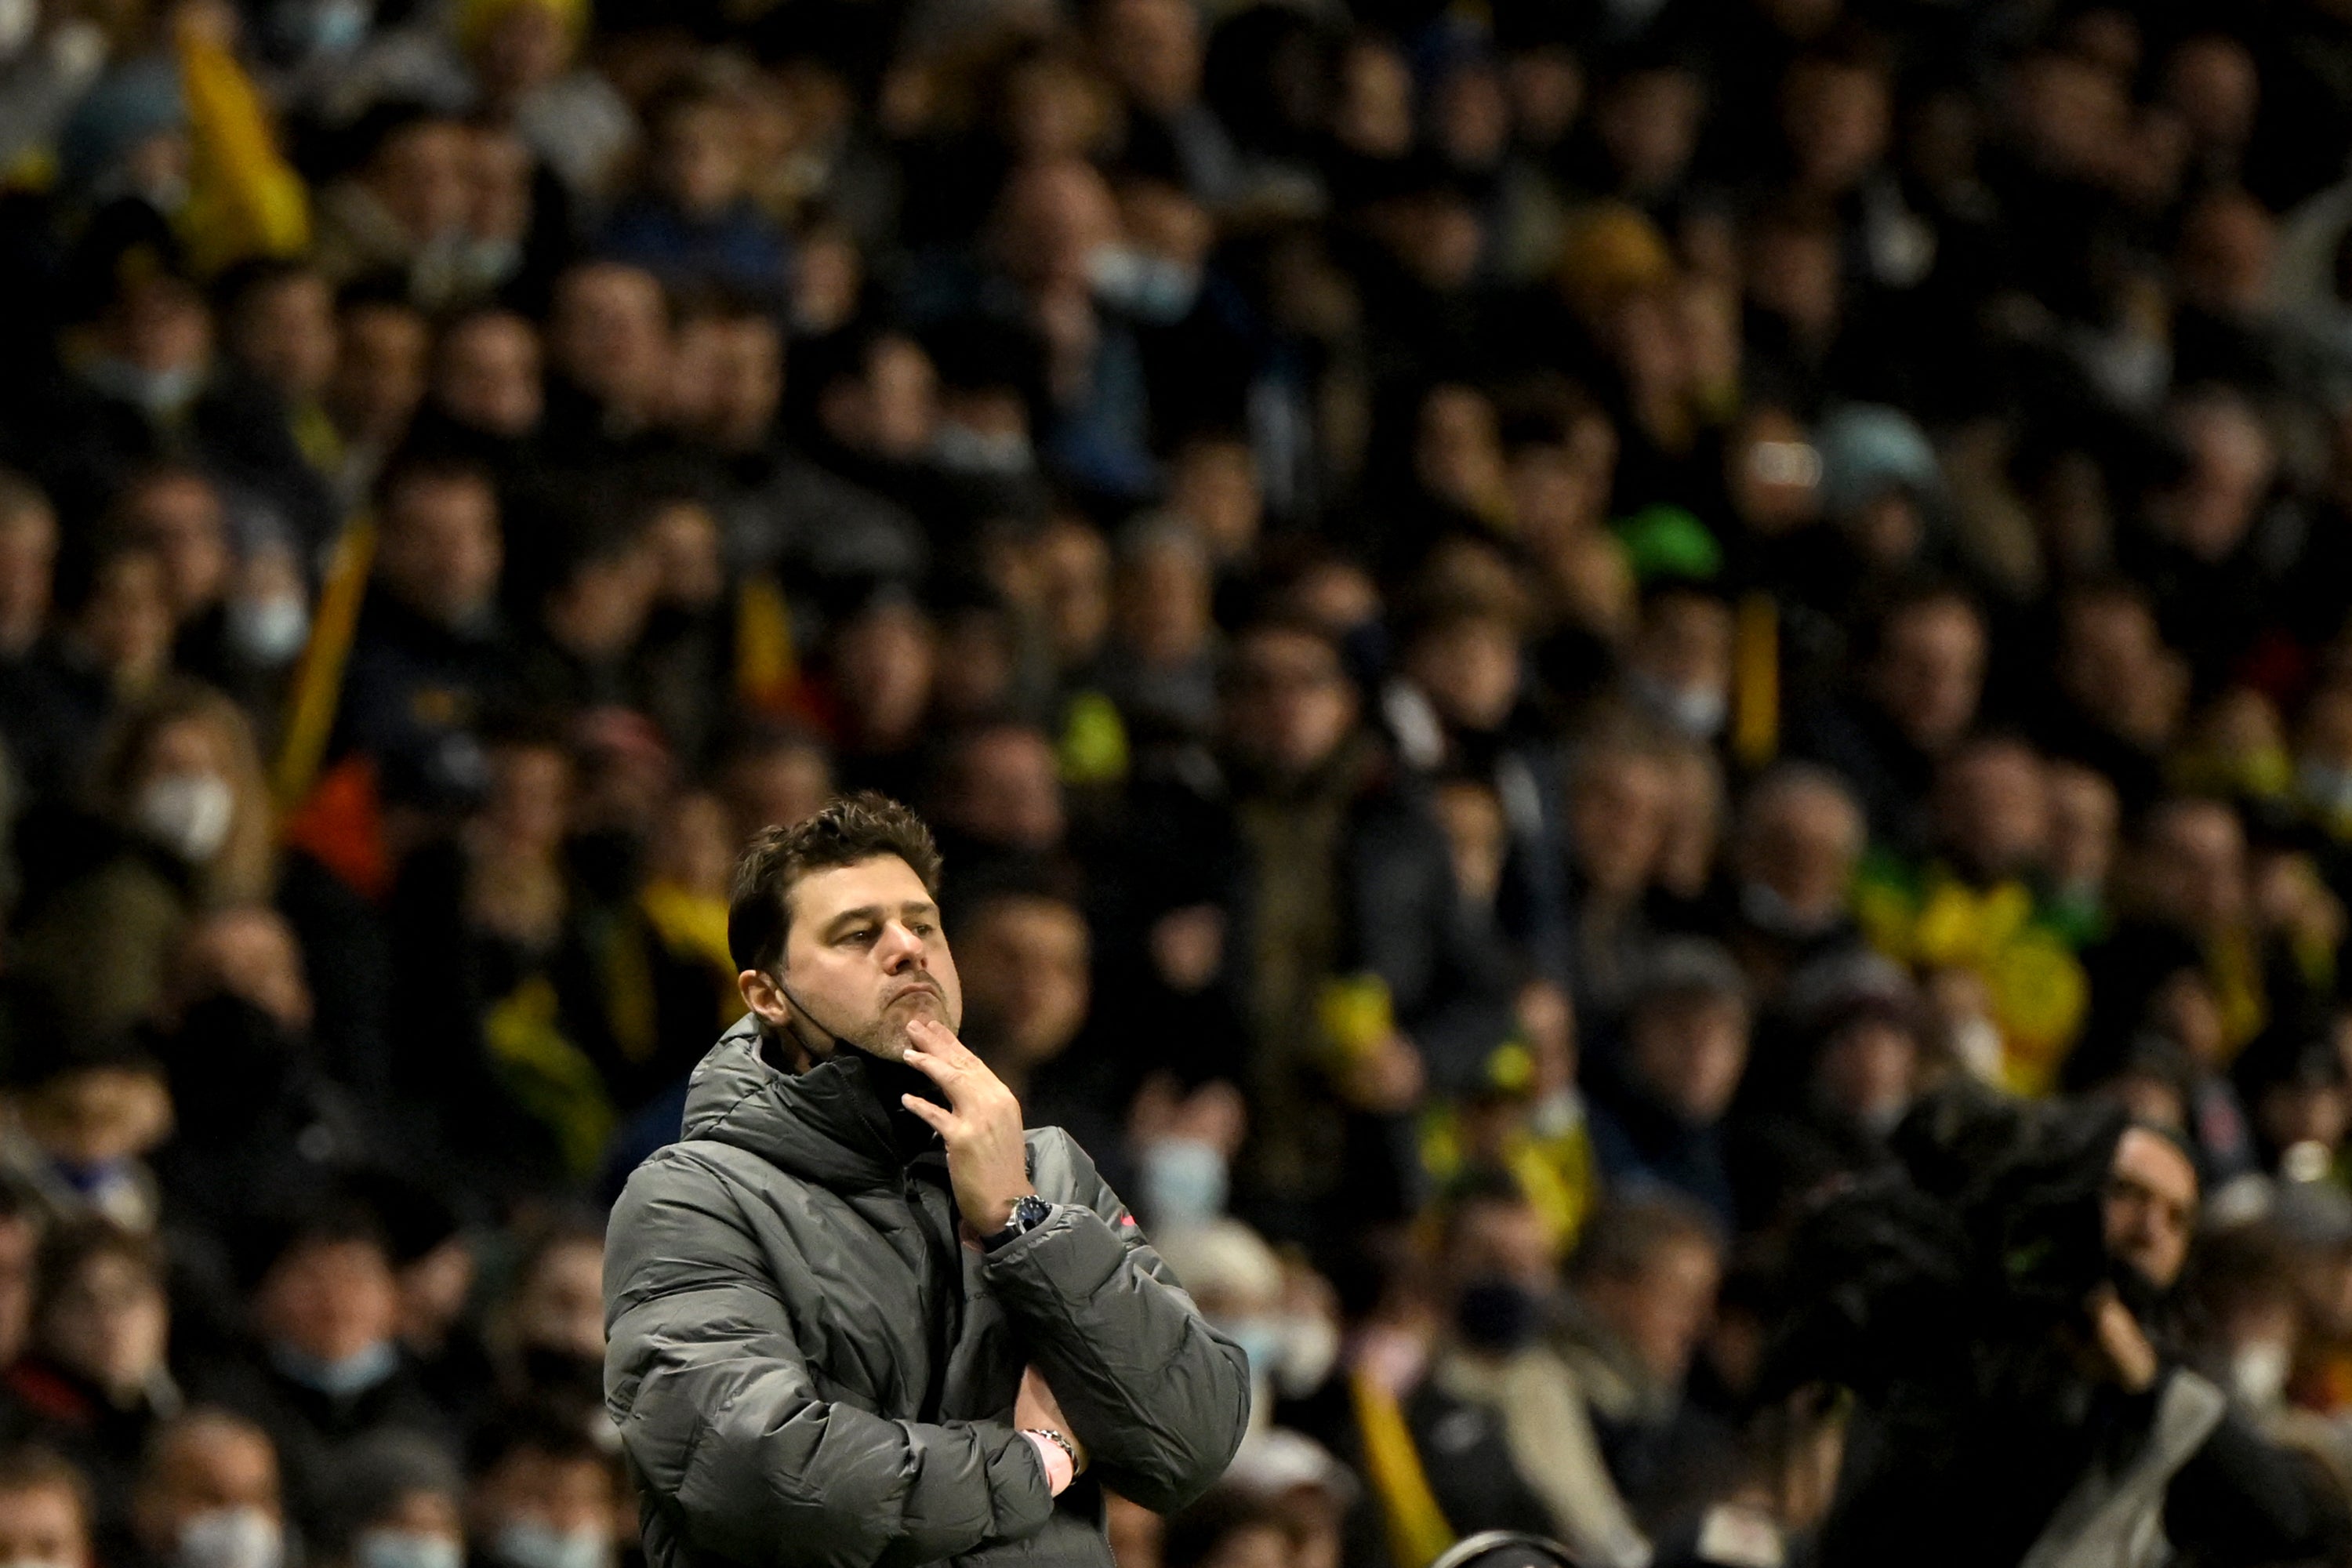 PSG’s defeat at Nantes was Pochettino’s latest tough moment at the French club